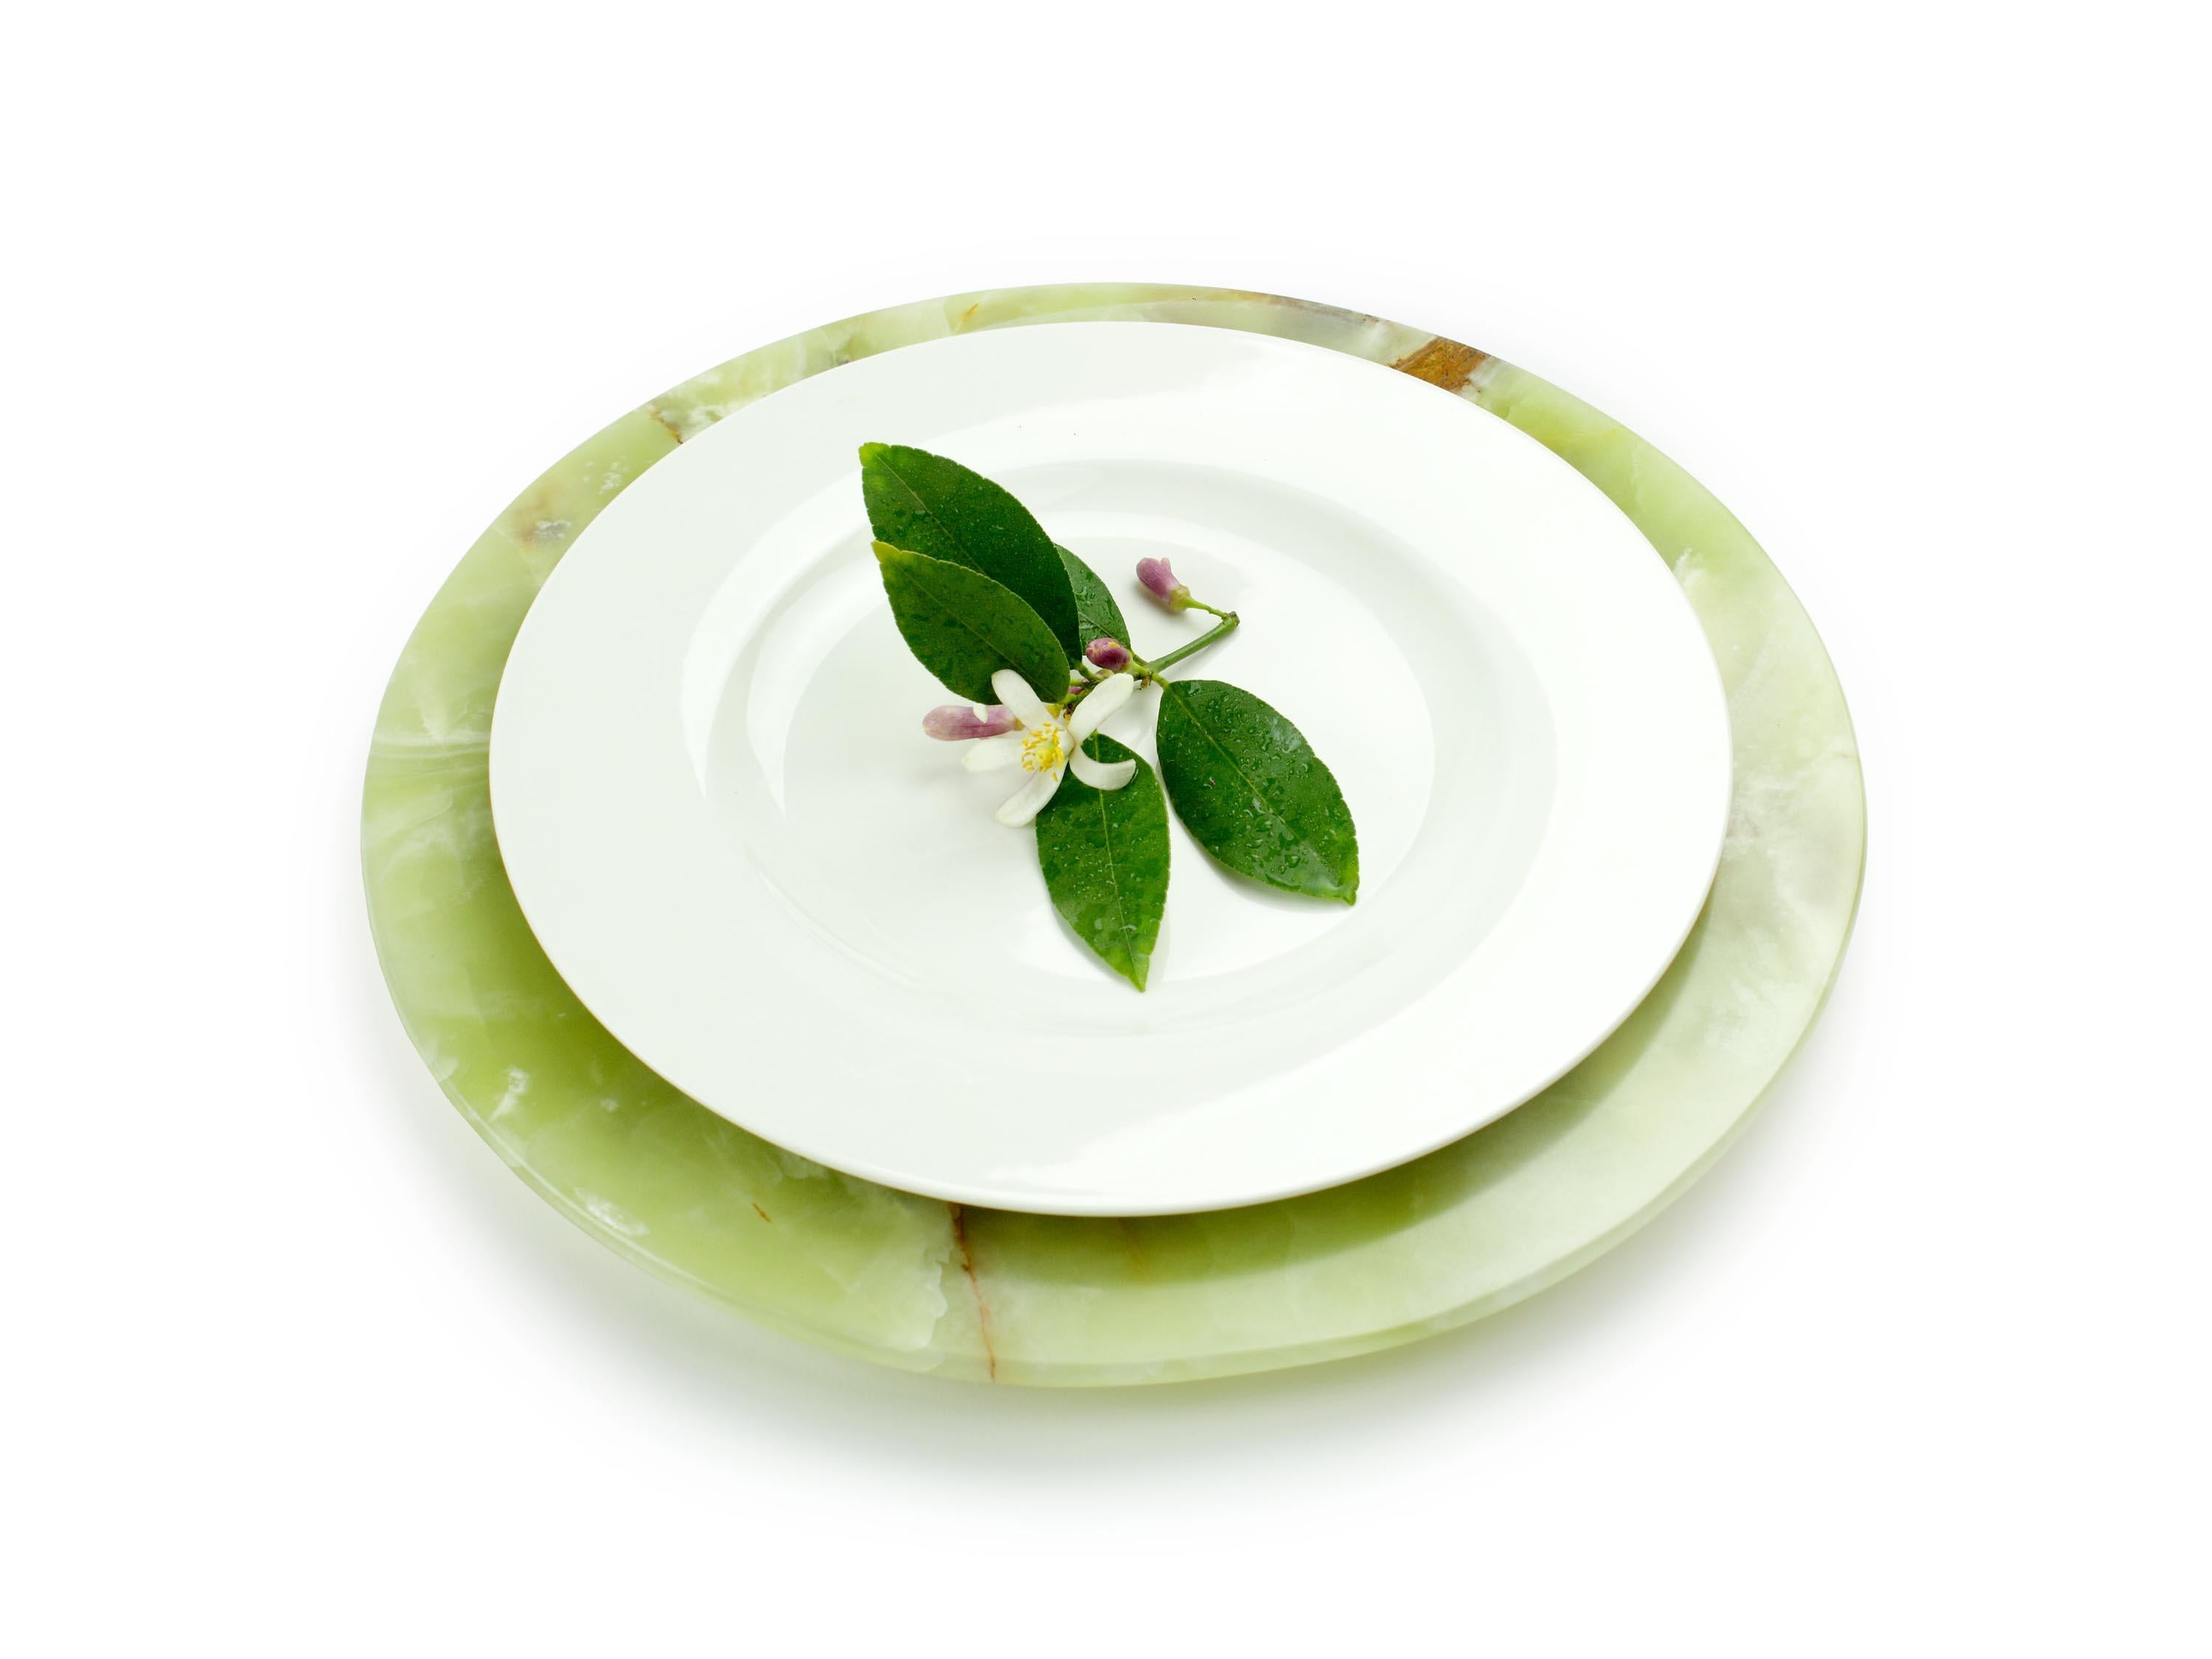 Hand carved charger plate in green onyx. Multiple use as charger plates, plates, platters and placers. The polished finishing underlines the transparency of the onyx making this a very precious object.

Dimensions: D 33, H 1.9 cm. Available in